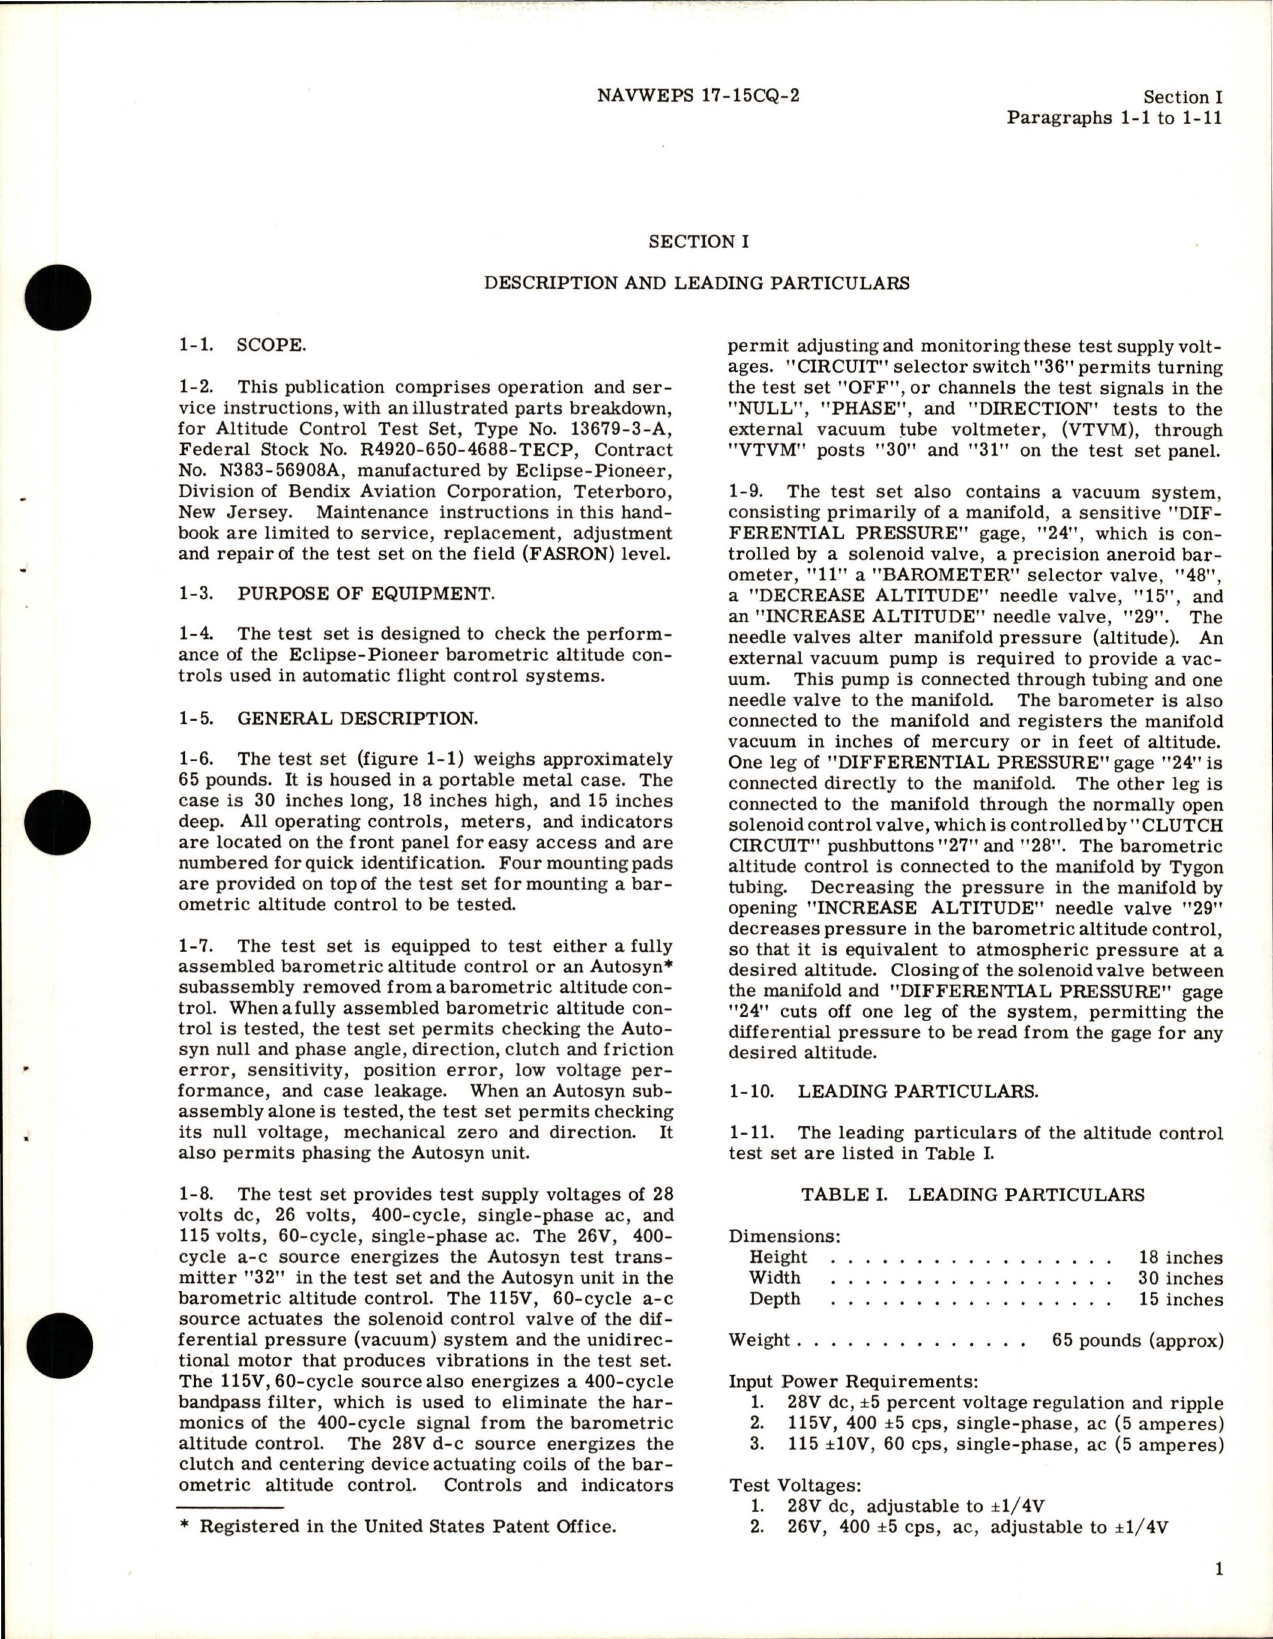 Sample page 7 from AirCorps Library document: Operation and Service Instructions with Illustrated Parts Breakdown for Altitude Control Test Set - Type 13679-3-A 